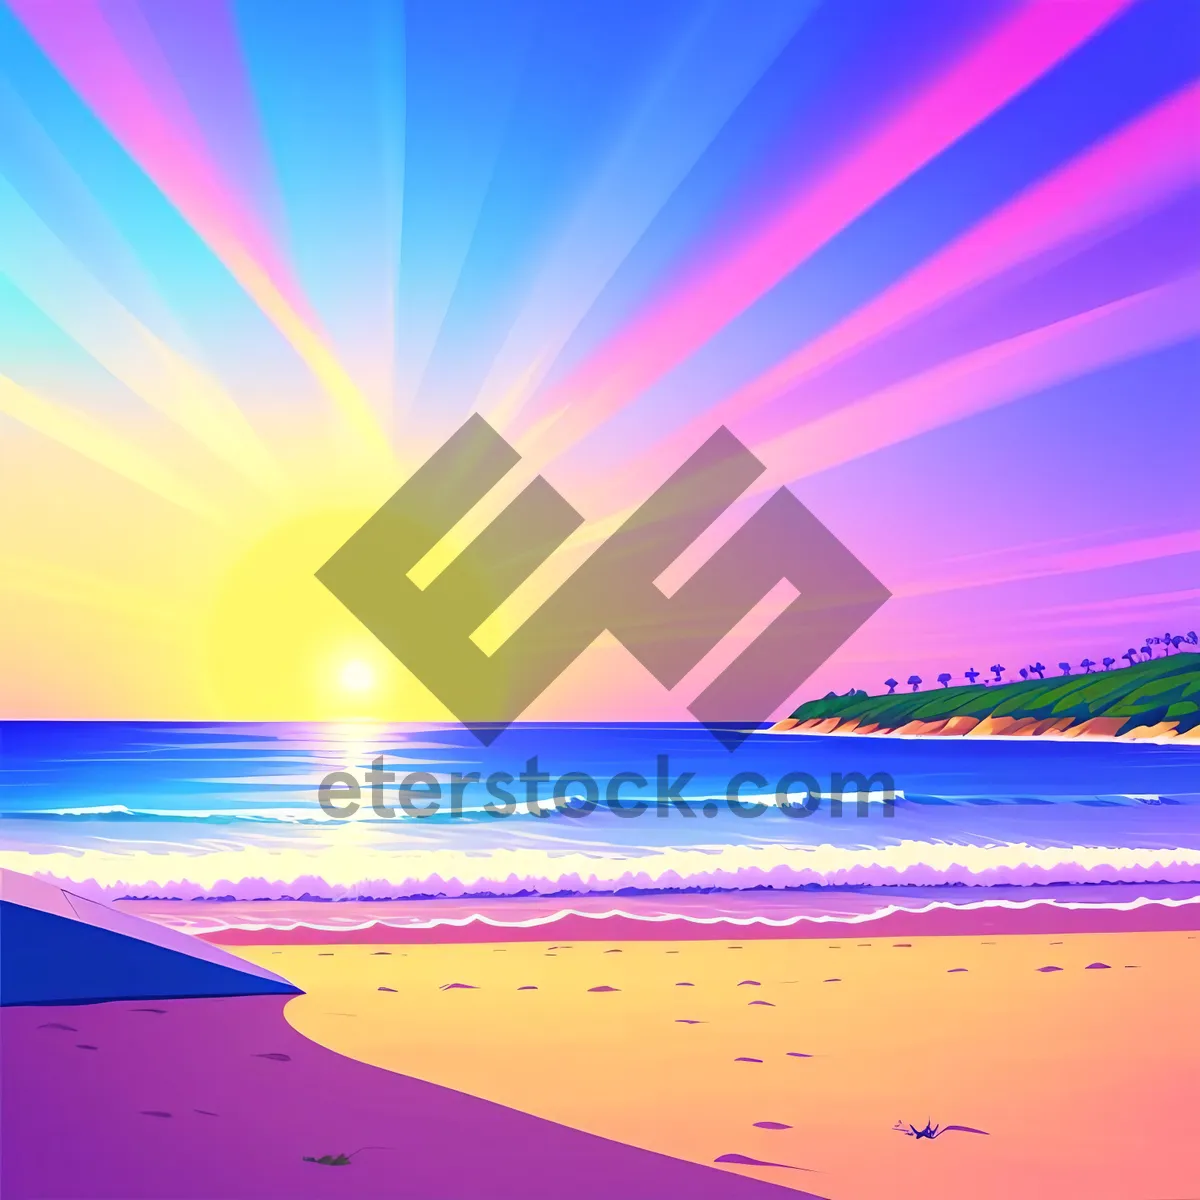 Picture of Radiant Fractal Seascape: Creative Colorful Design